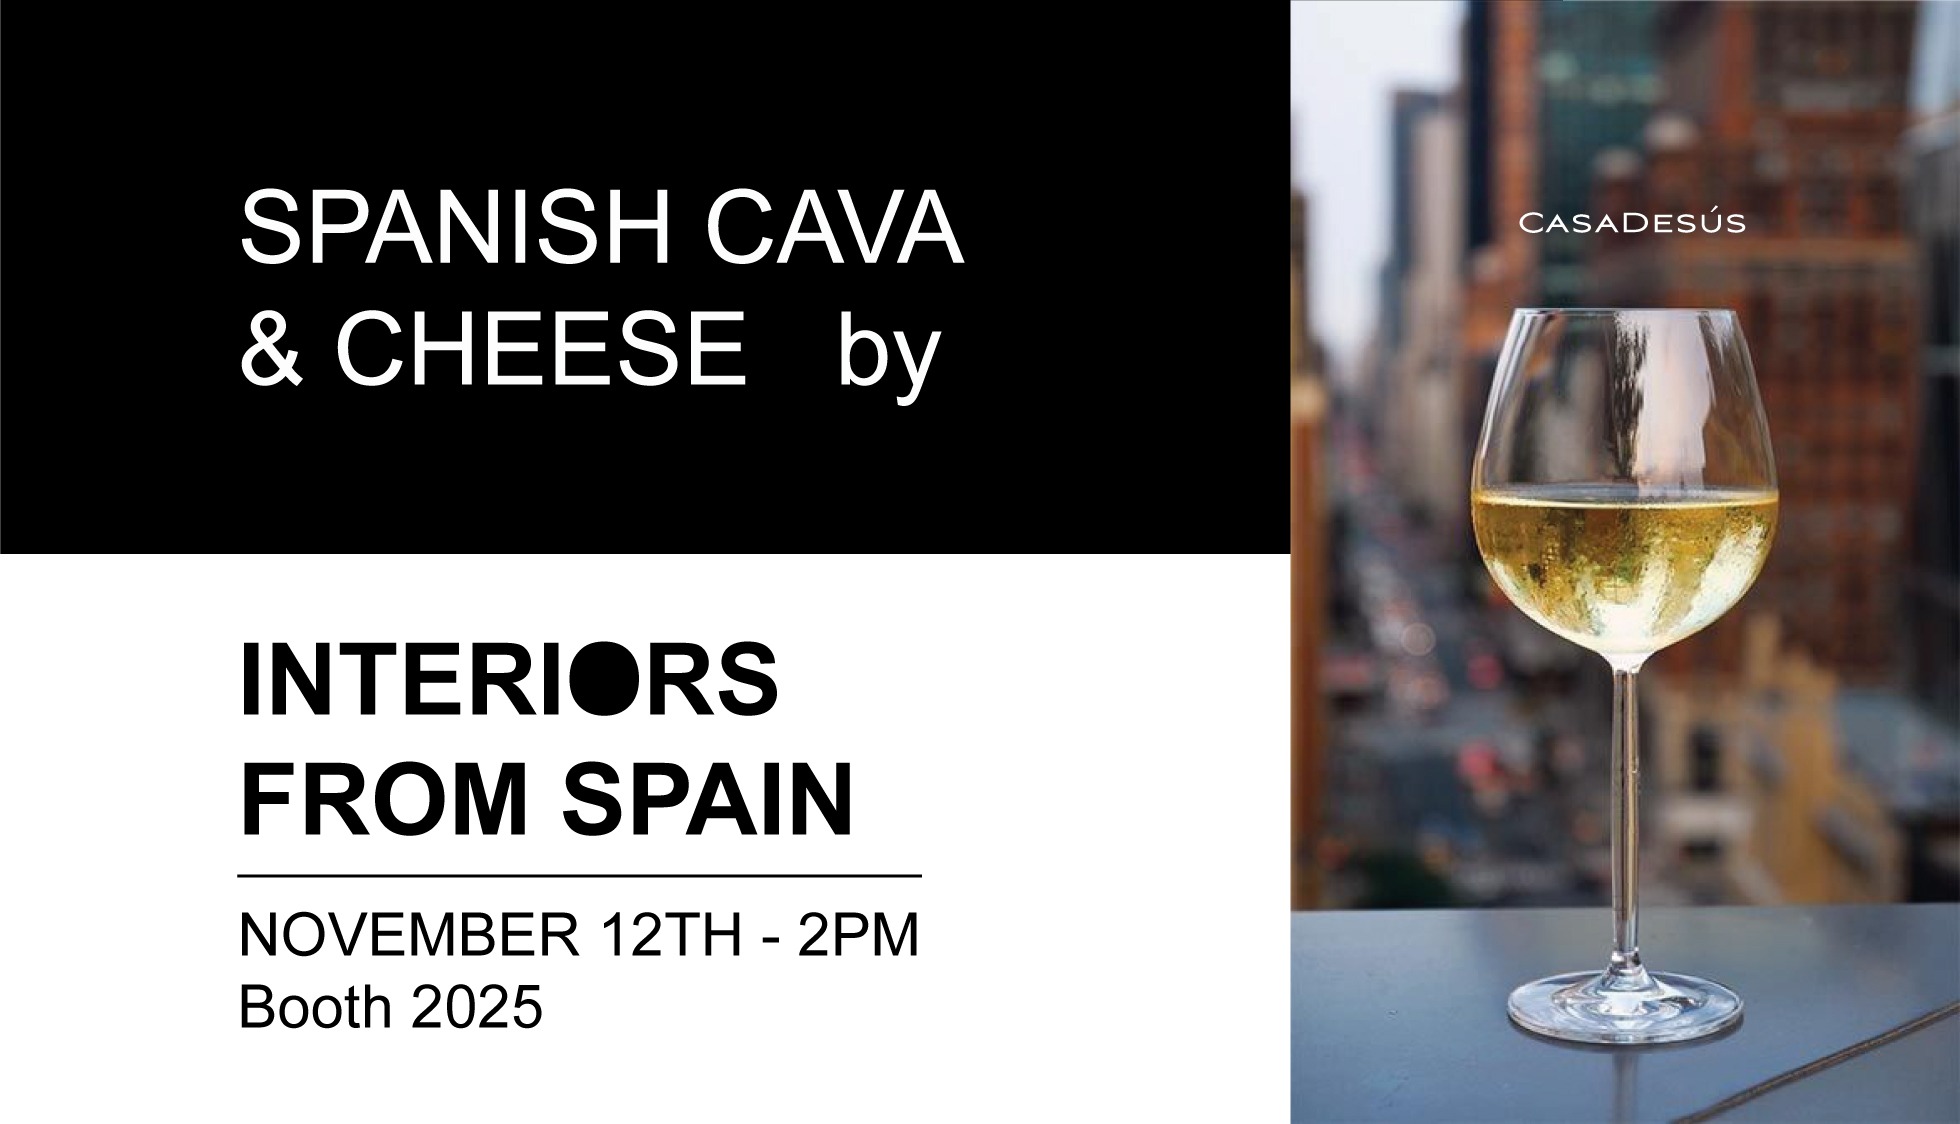 Spanish Cava & Cheese by Interiors from Spain 346